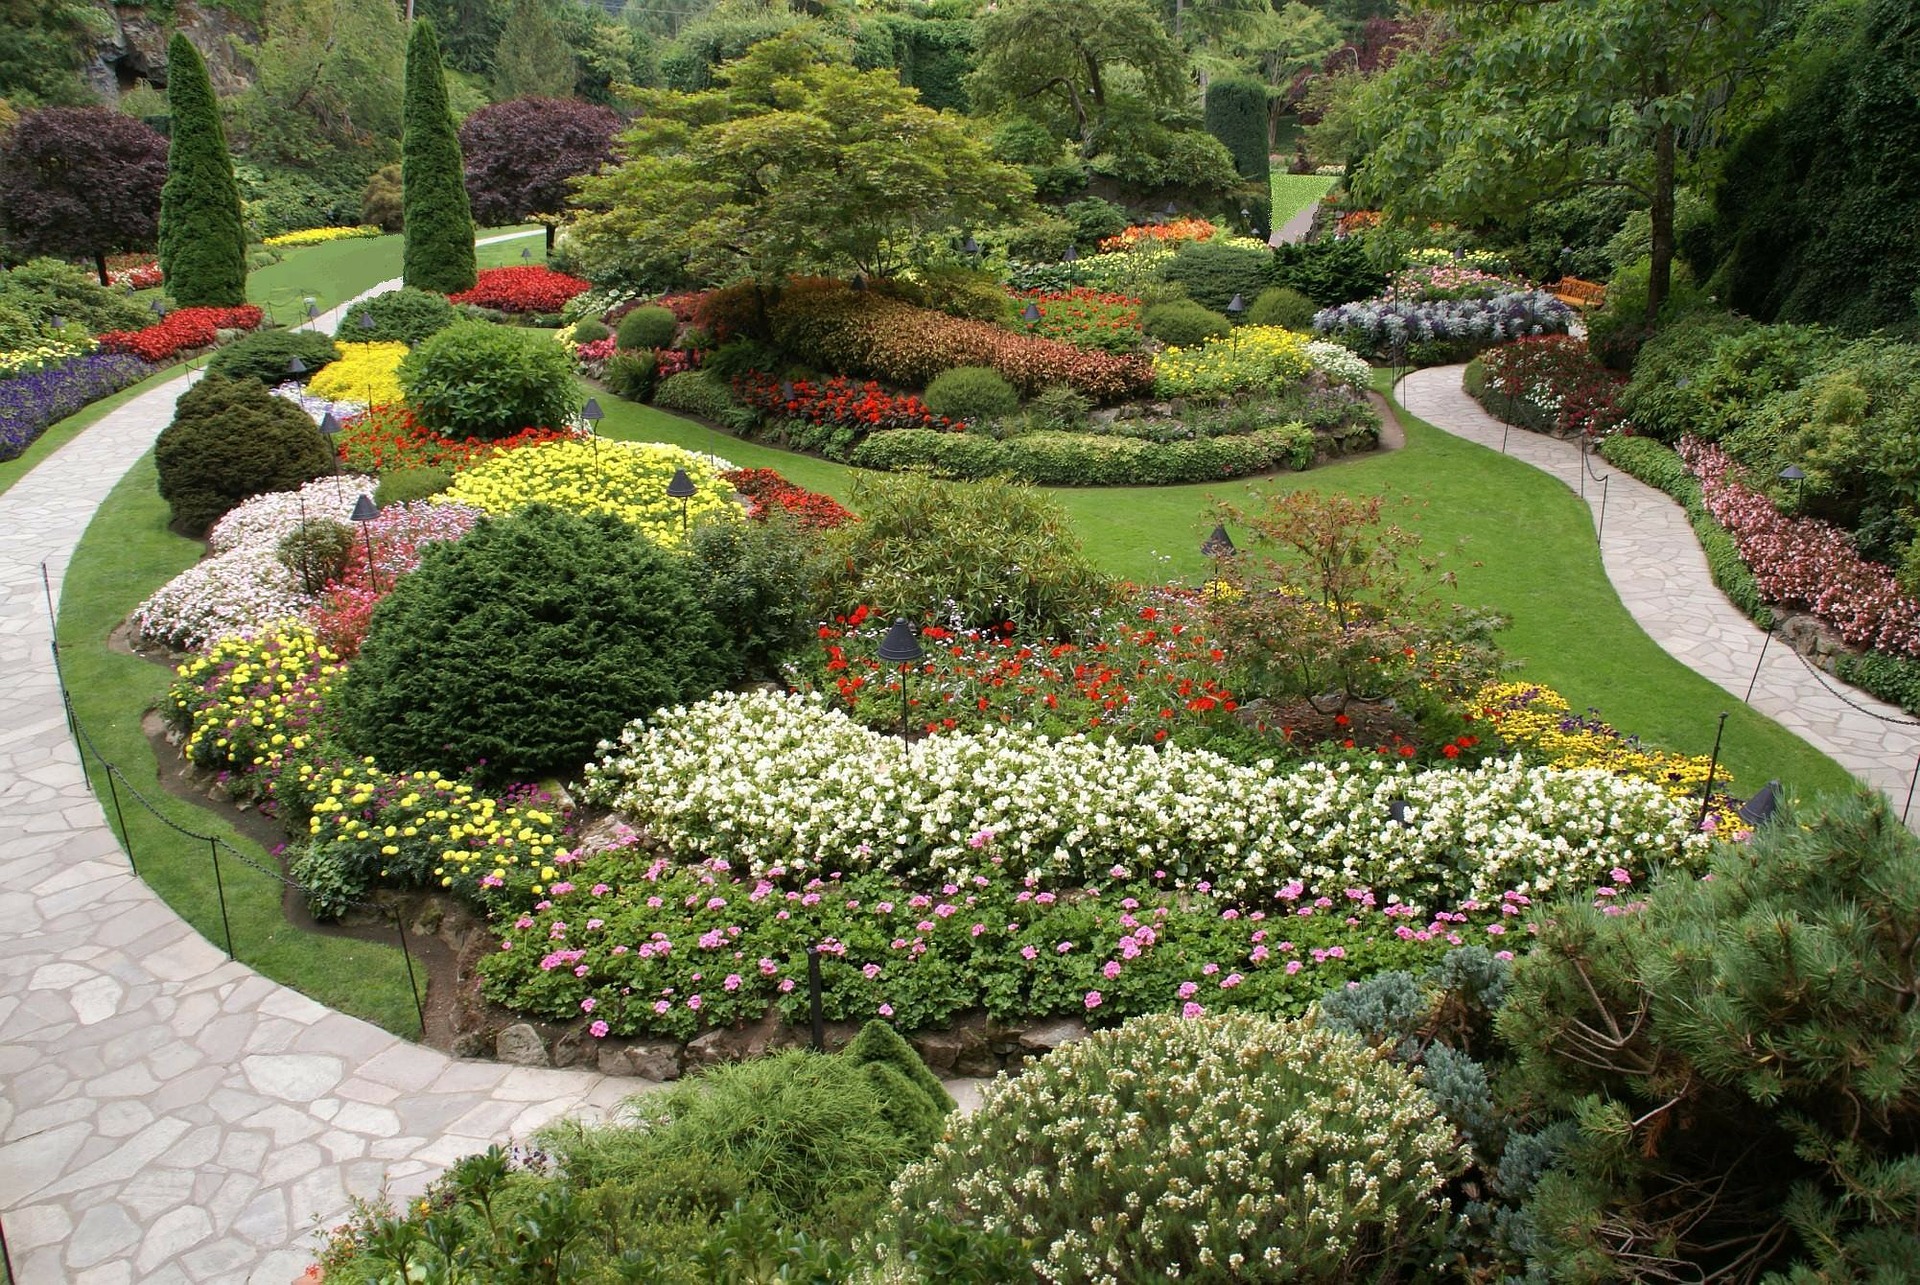 You don't have to create the Butchart Gardens in Victoria, British Colombia to get the full benefits of gardening. Photo: Photoman/Creative Commons License